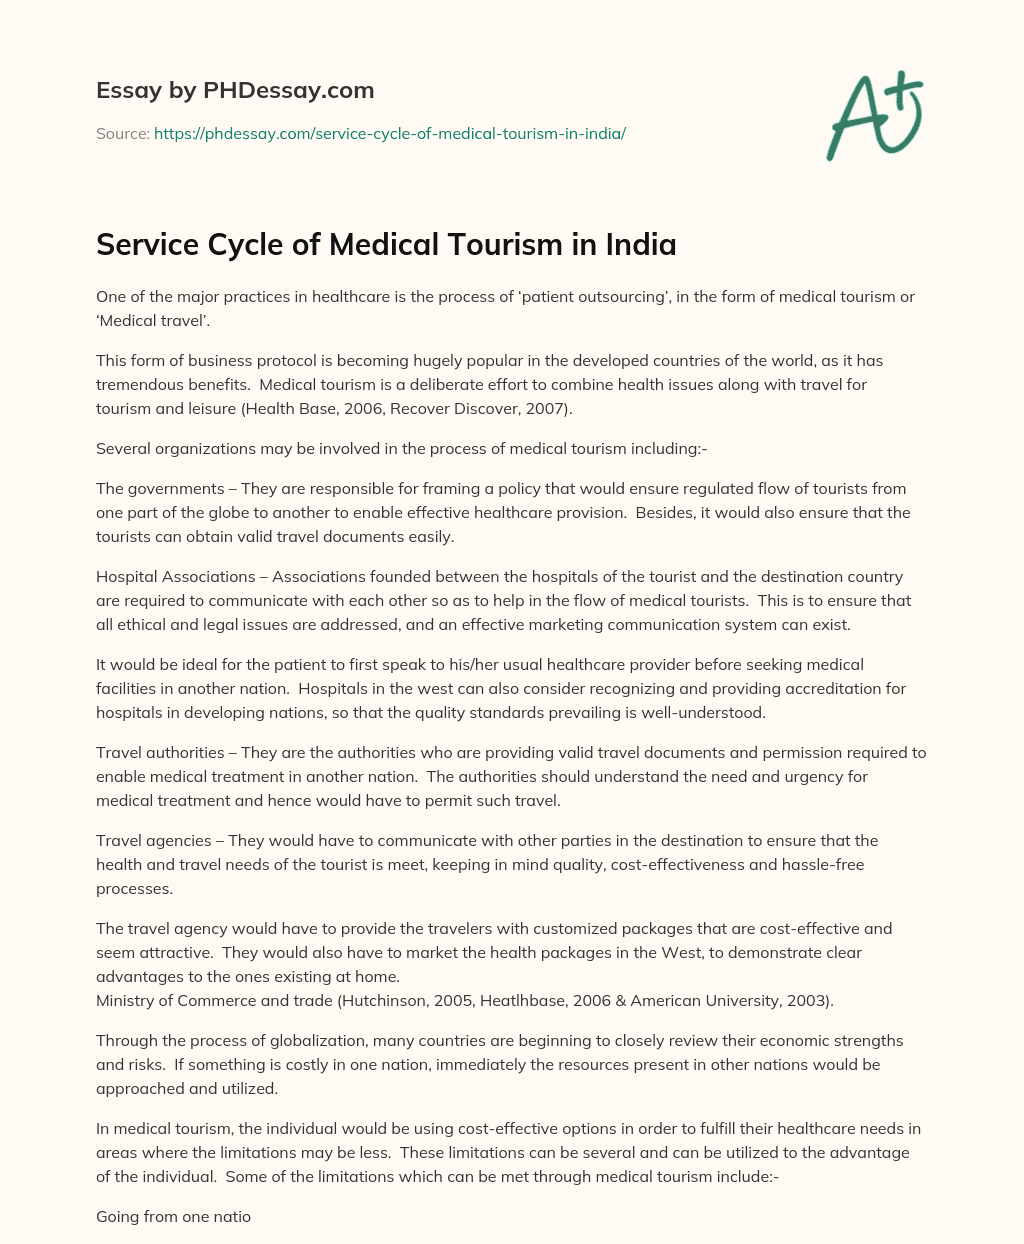 Service Cycle of Medical Tourism in India essay